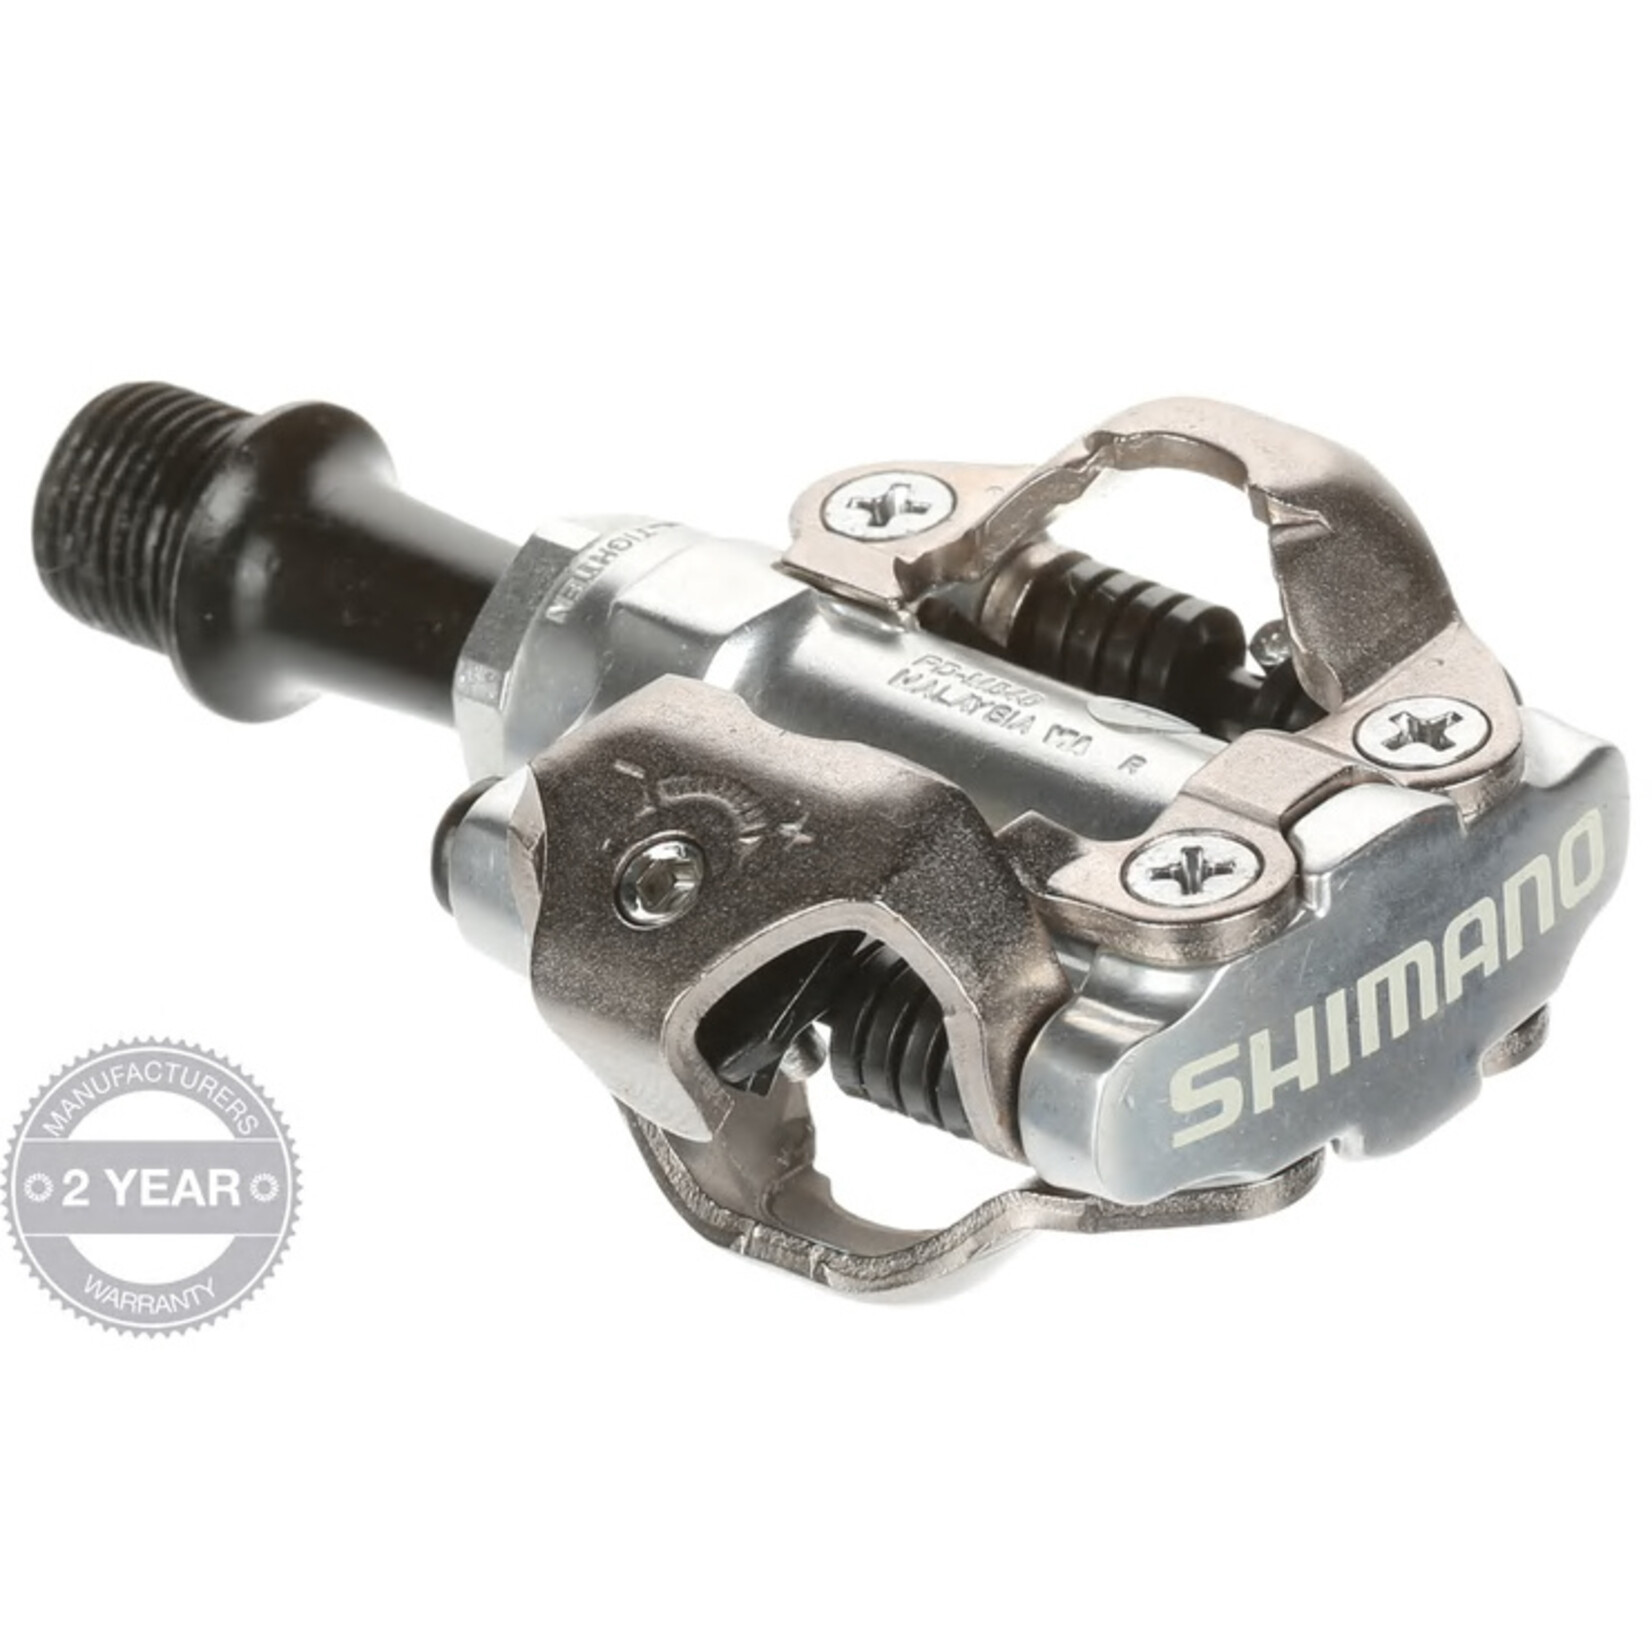 Shimano Pedals SHIMANO PD-M540 MTB SPD pedals - two sided mechanism